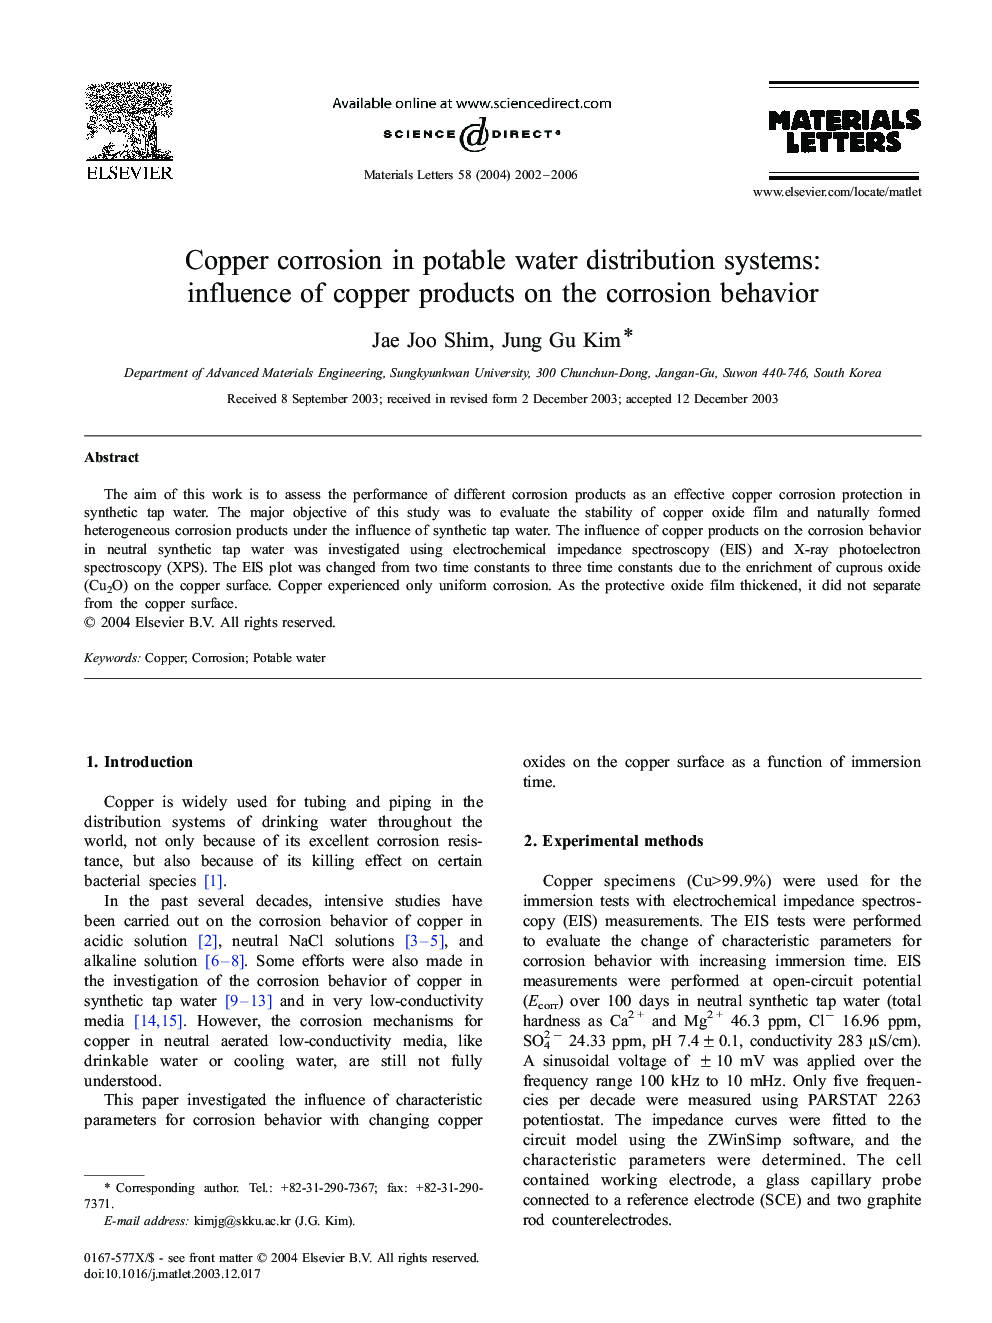 Copper corrosion in potable water distribution systems: influence of copper products on the corrosion behavior